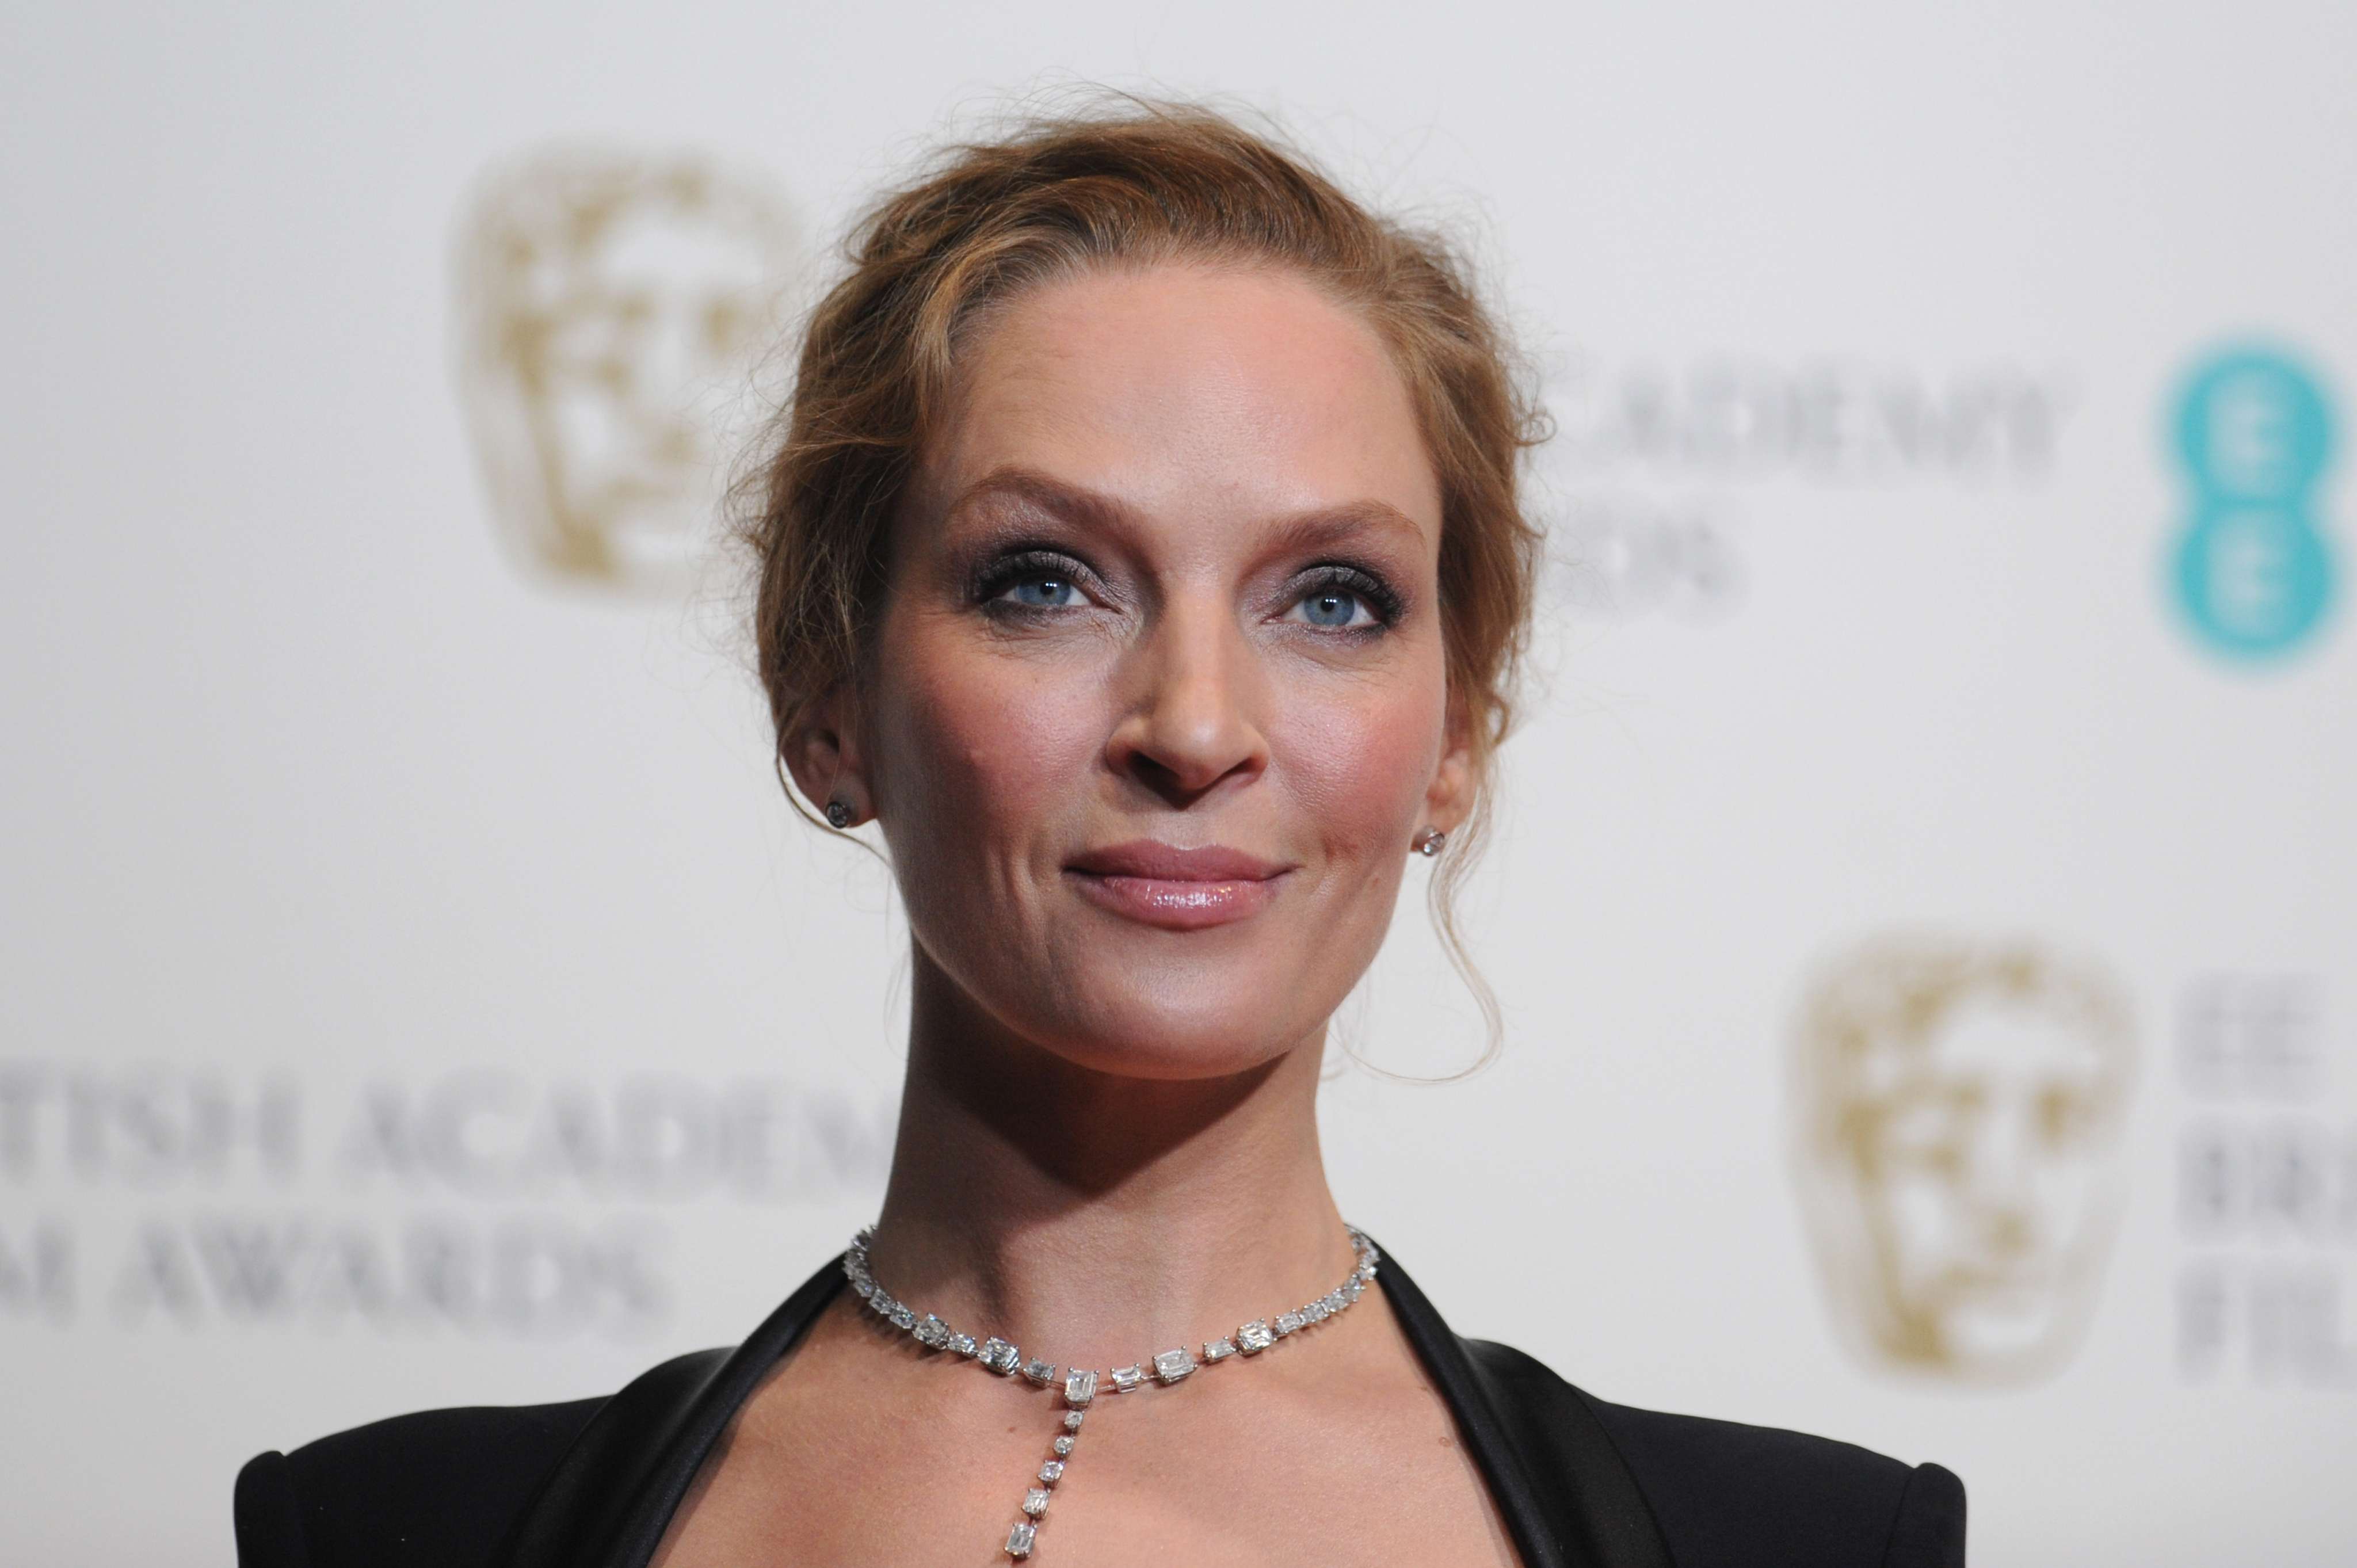 34 Facts About Uma Thurman - Facts.net